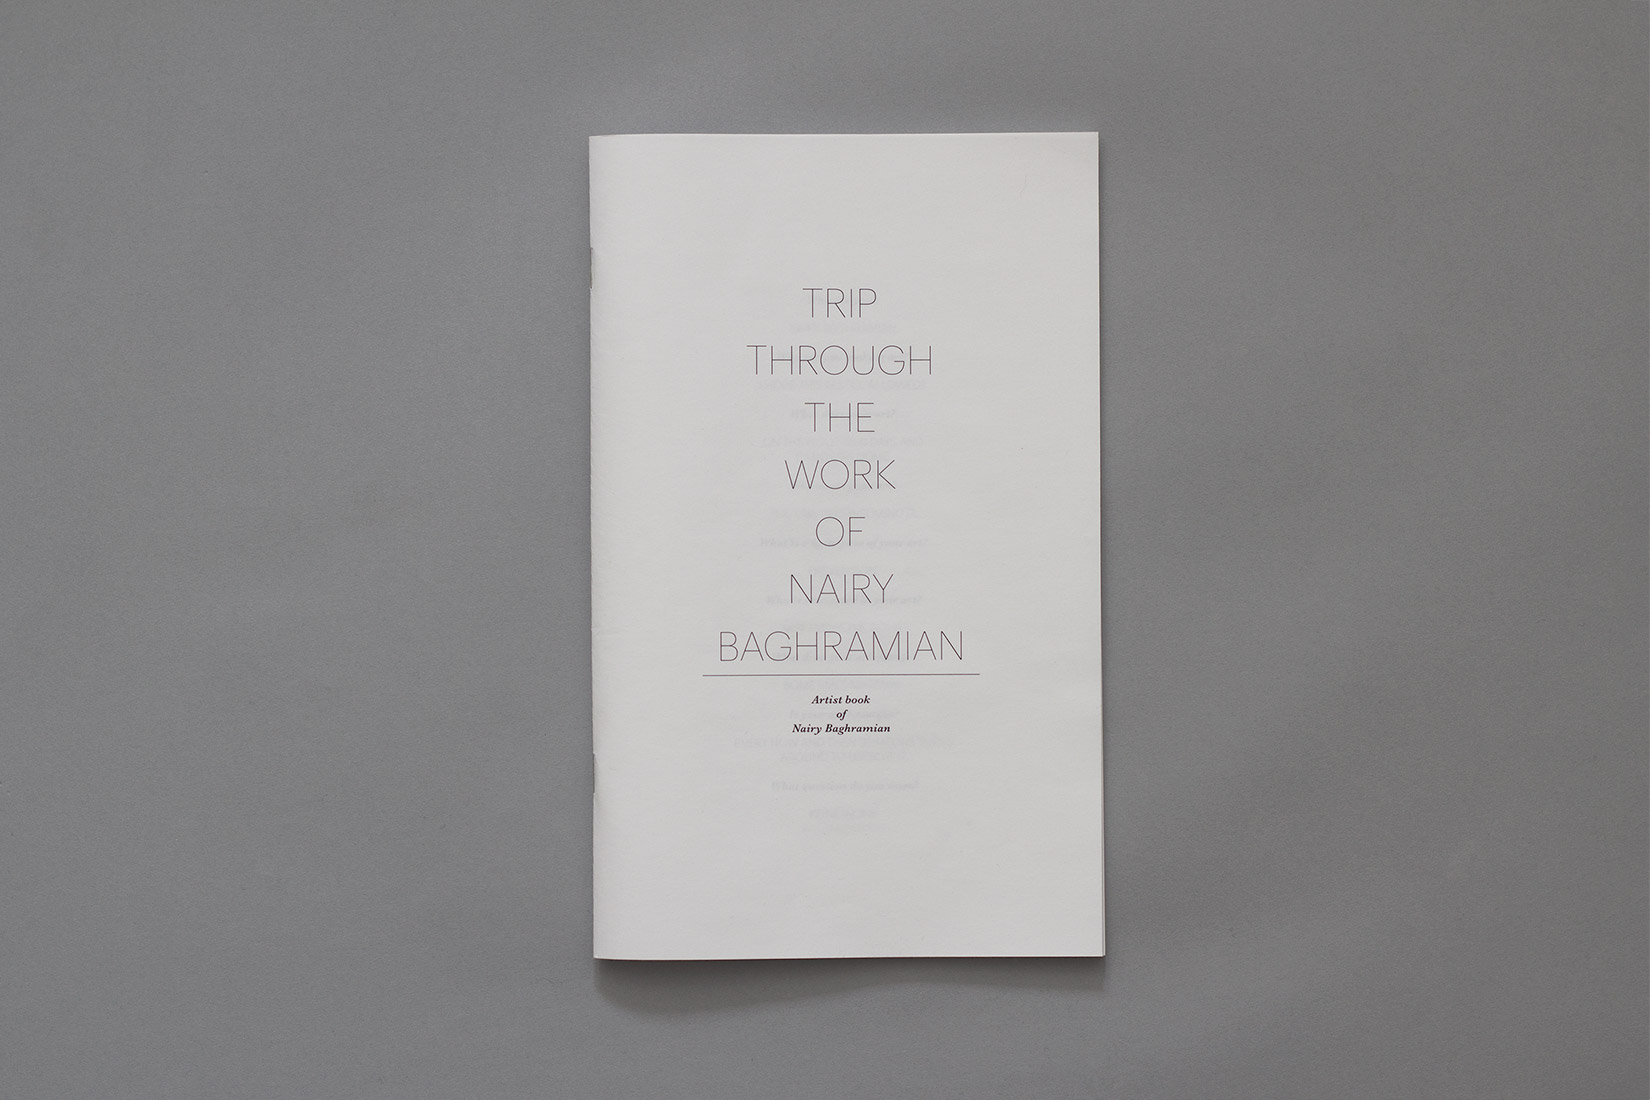 Livre d'artiste, Nairy Baghramian, typographie, Graphik, Baskerville, Trip through the work of Nairy Baghramian